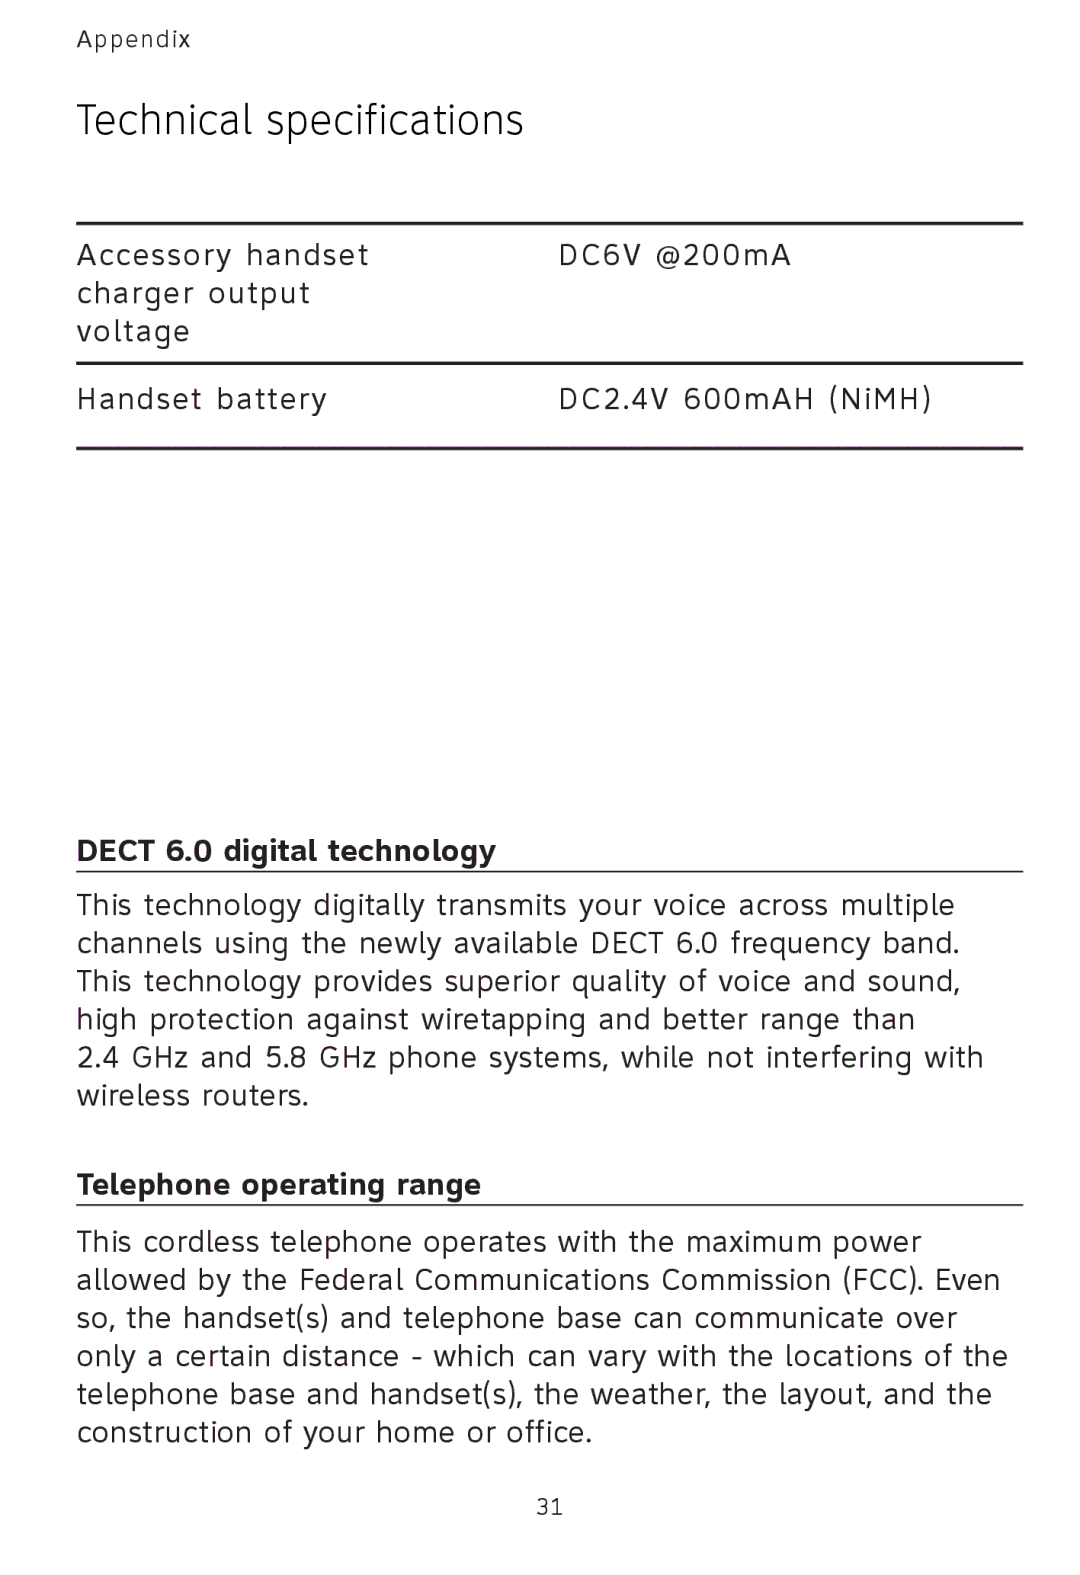 AT&T AT3101 user manual Technical specifications, Dect 6.0 digital technology, Telephone operating range 